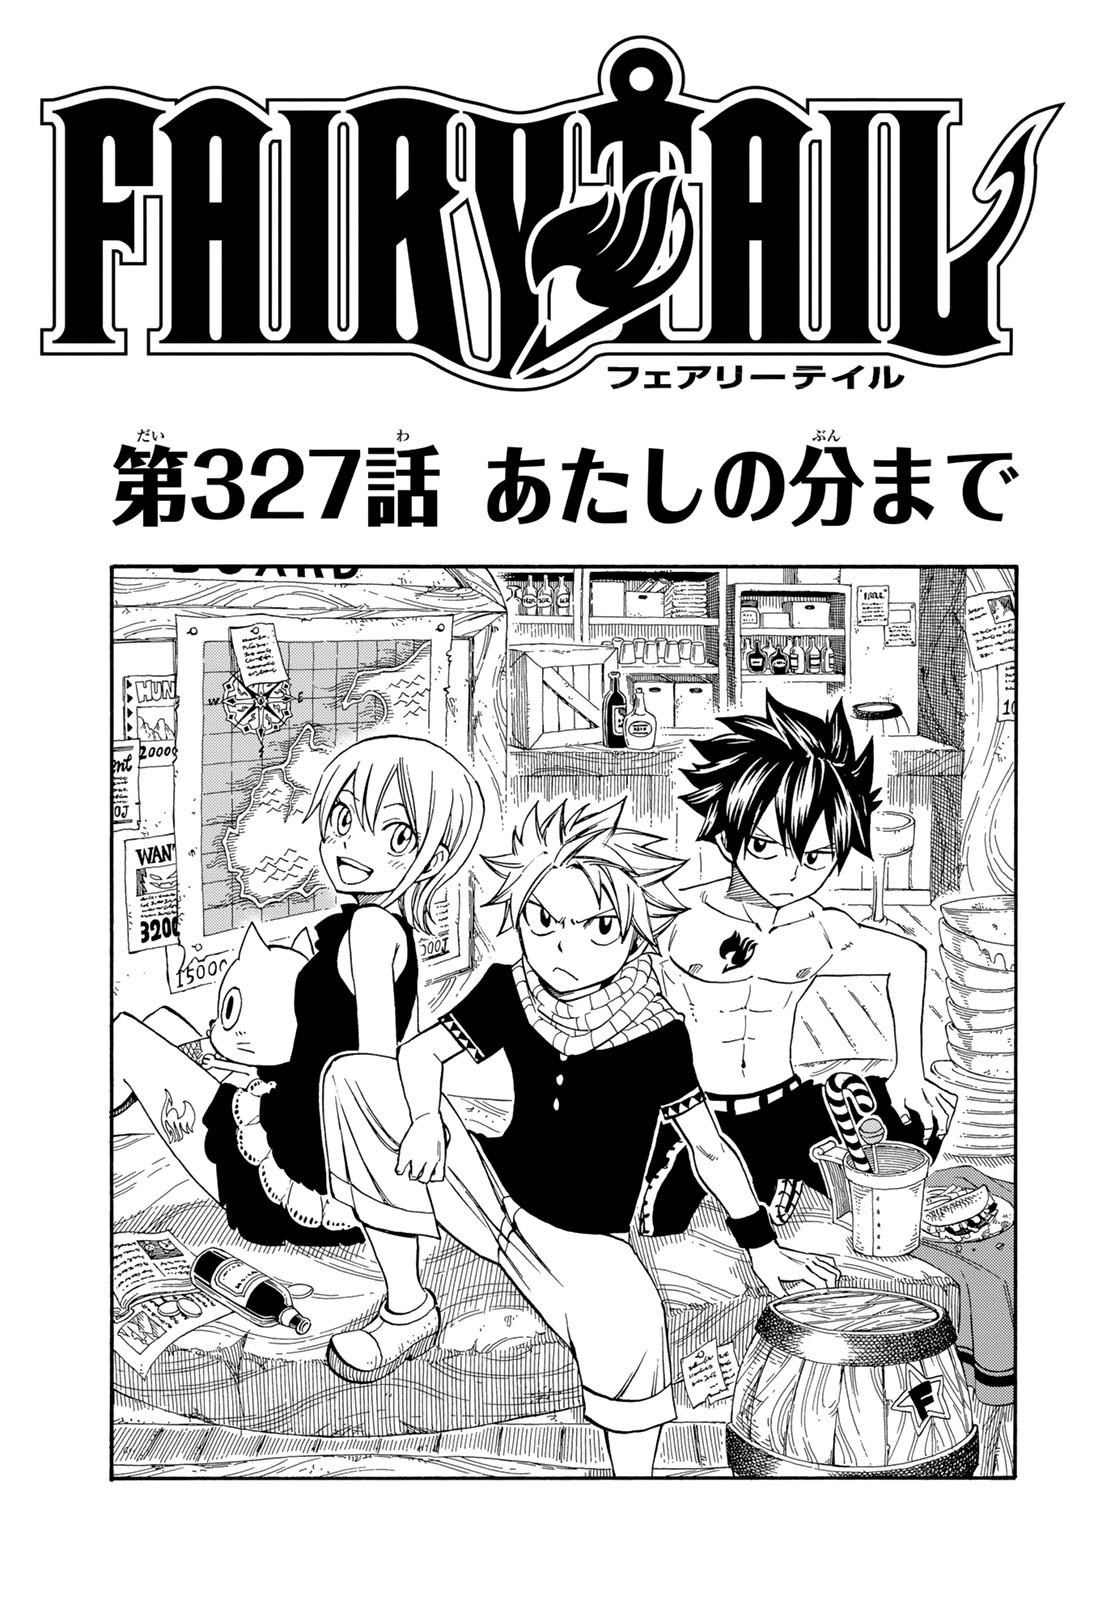 Weekly Shōnen Magazine - 週刊少年マガジン - Chapter 2024-31 - Page 432